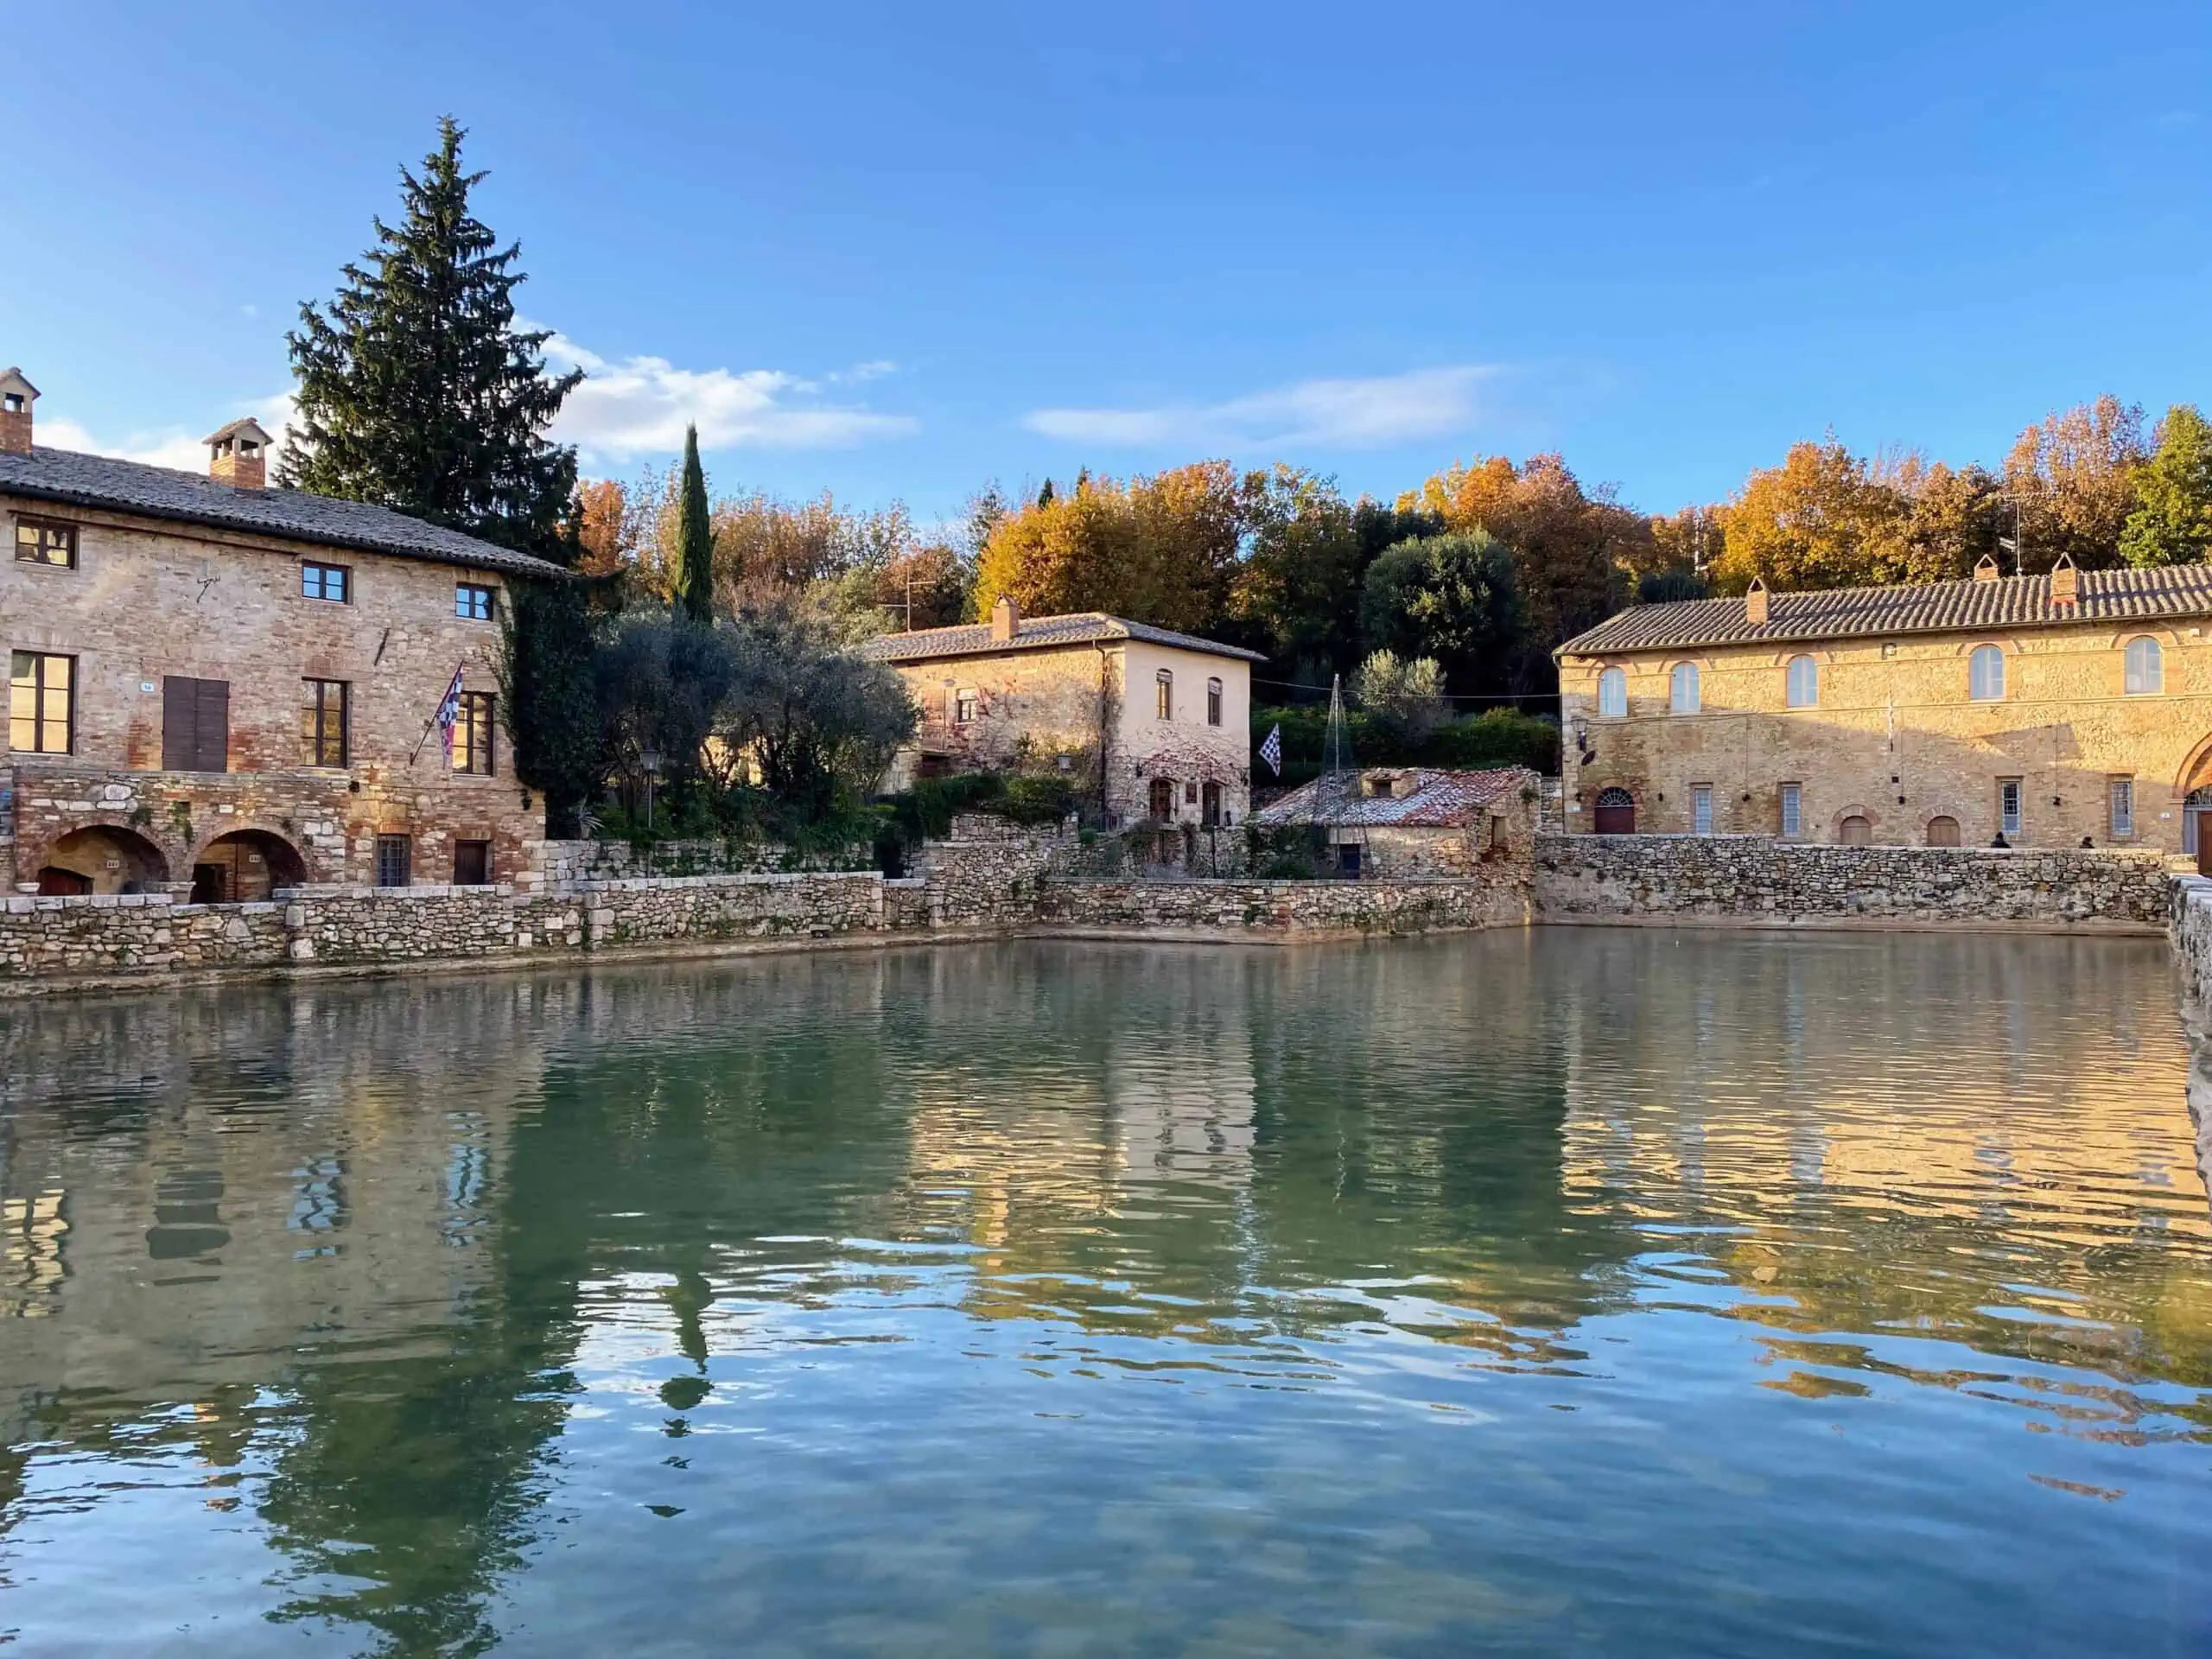 Main piazza (thermal pool) in Bagno Vignoni. It's surrounded by small stone wall and Tuscan stone buildings.